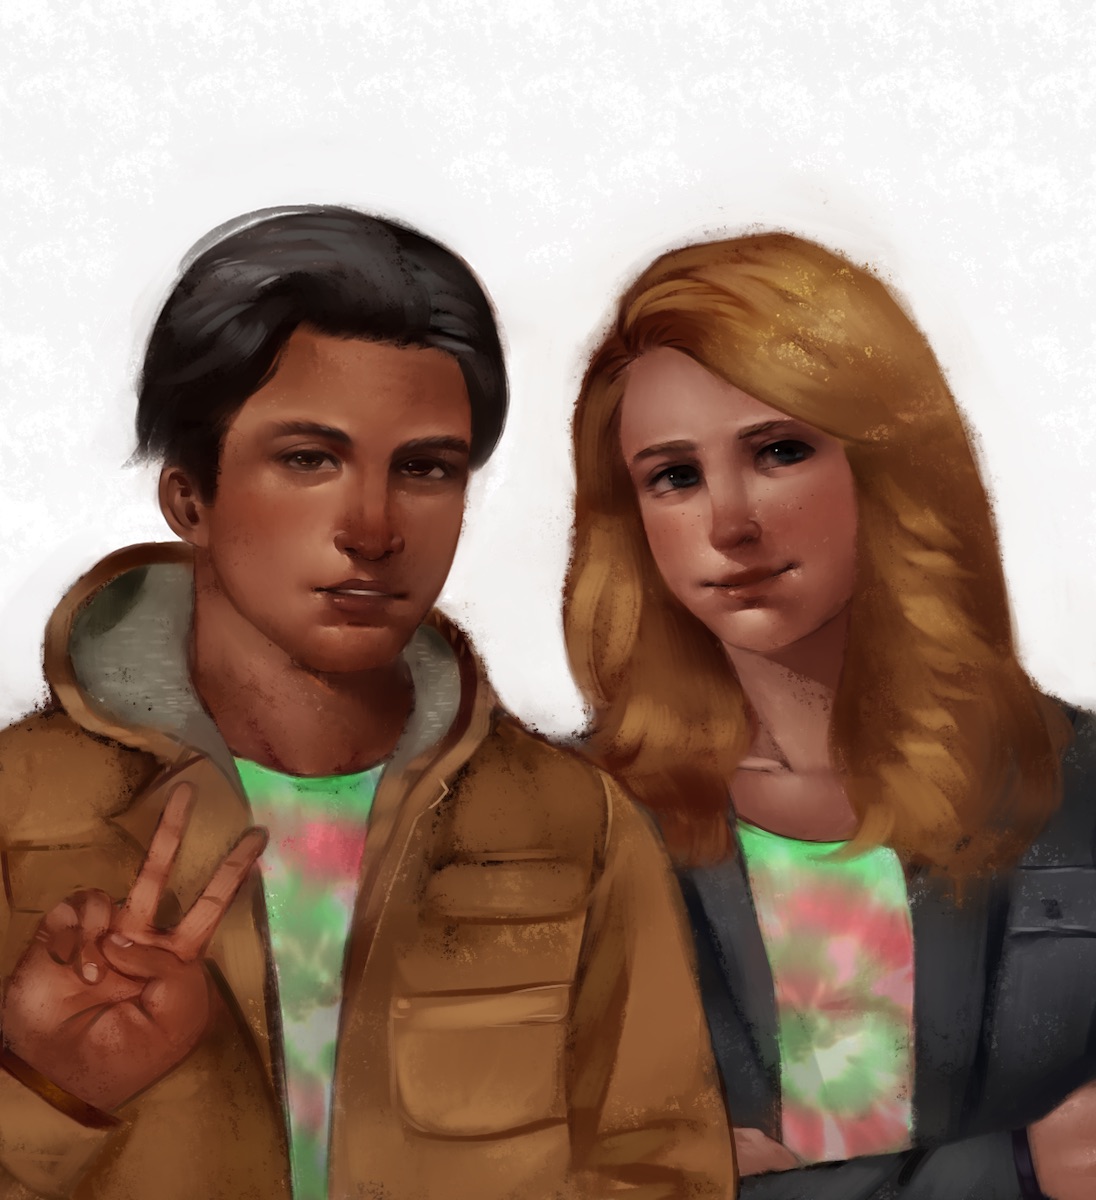 Commissioned Artwork of Marcus and Jessica!